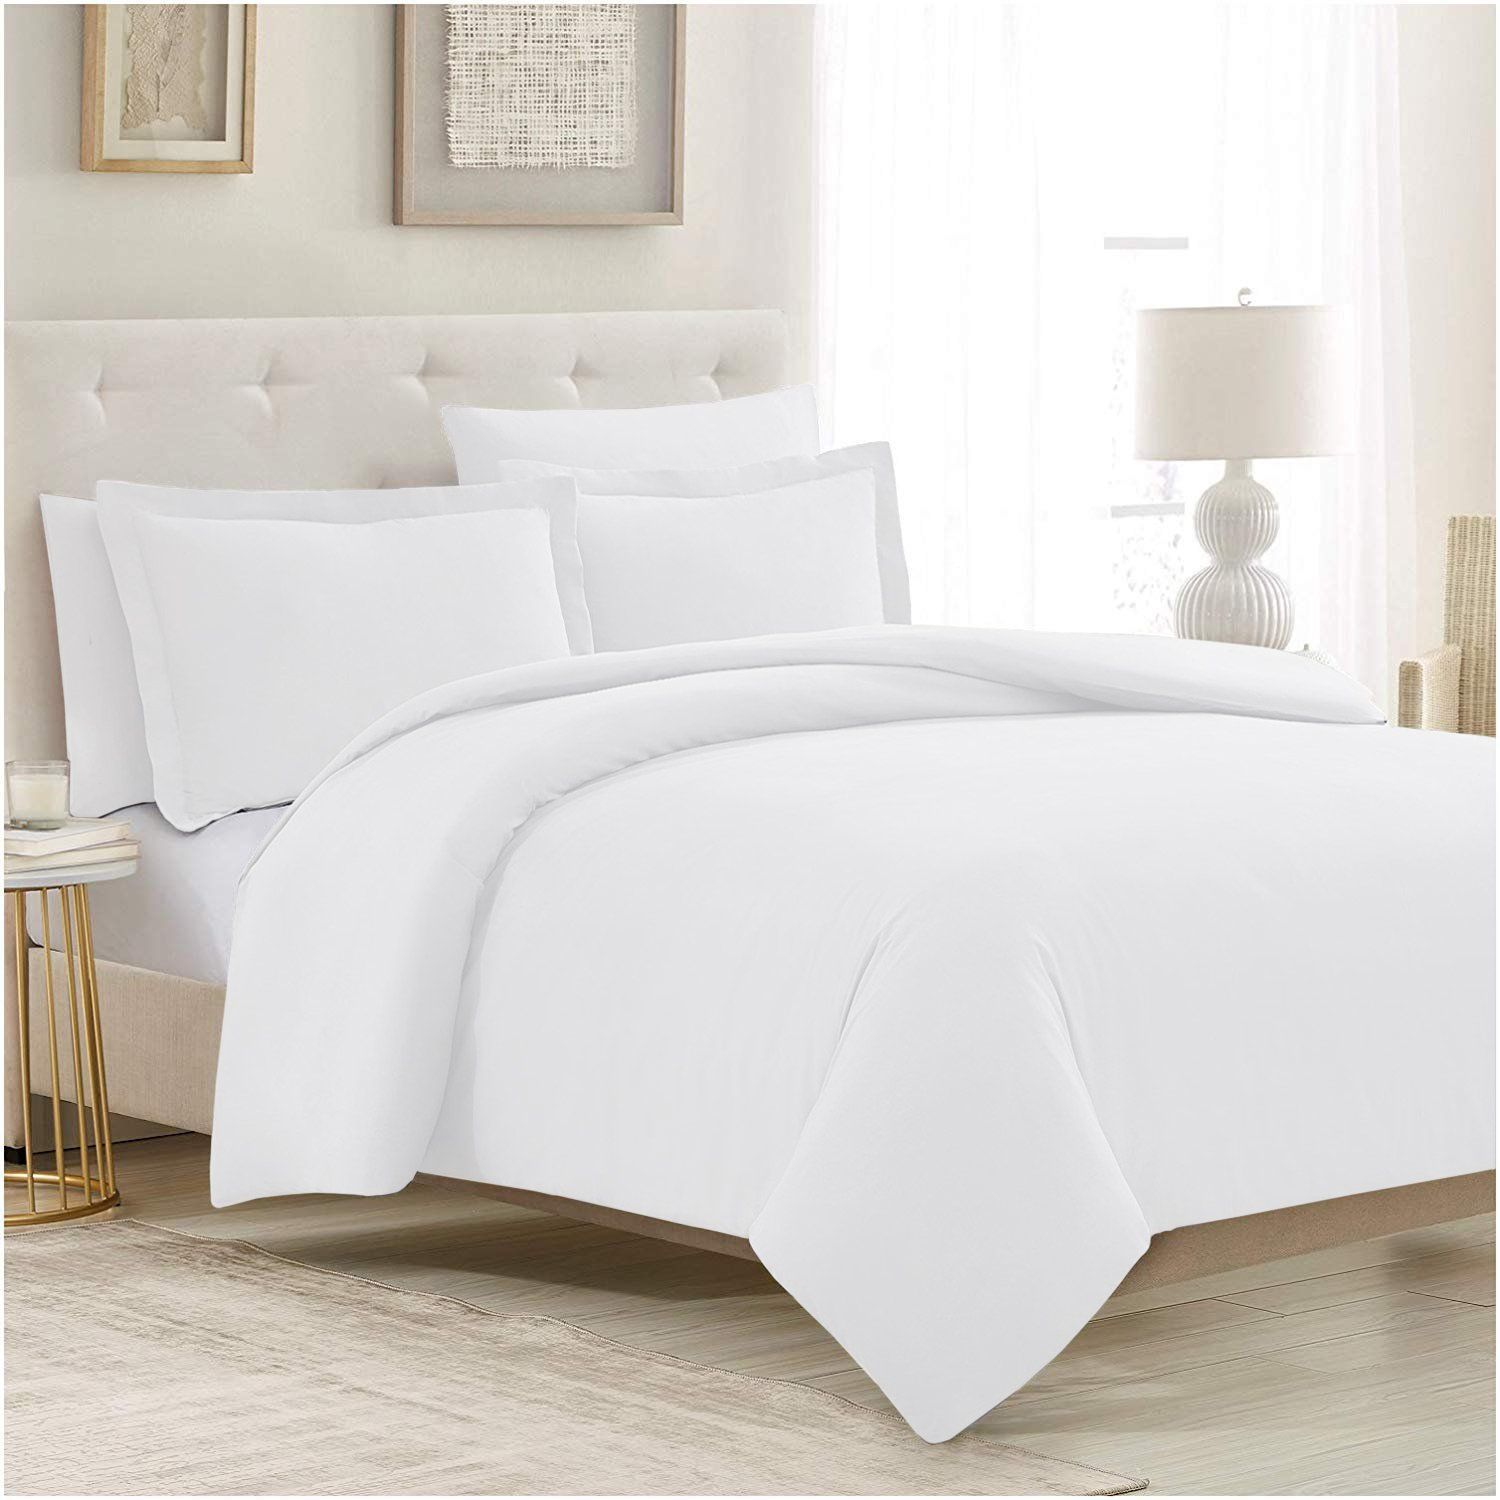 10 Best Duvet Covers Top Rated, What Is The Size Of A Queen Duvet Cover